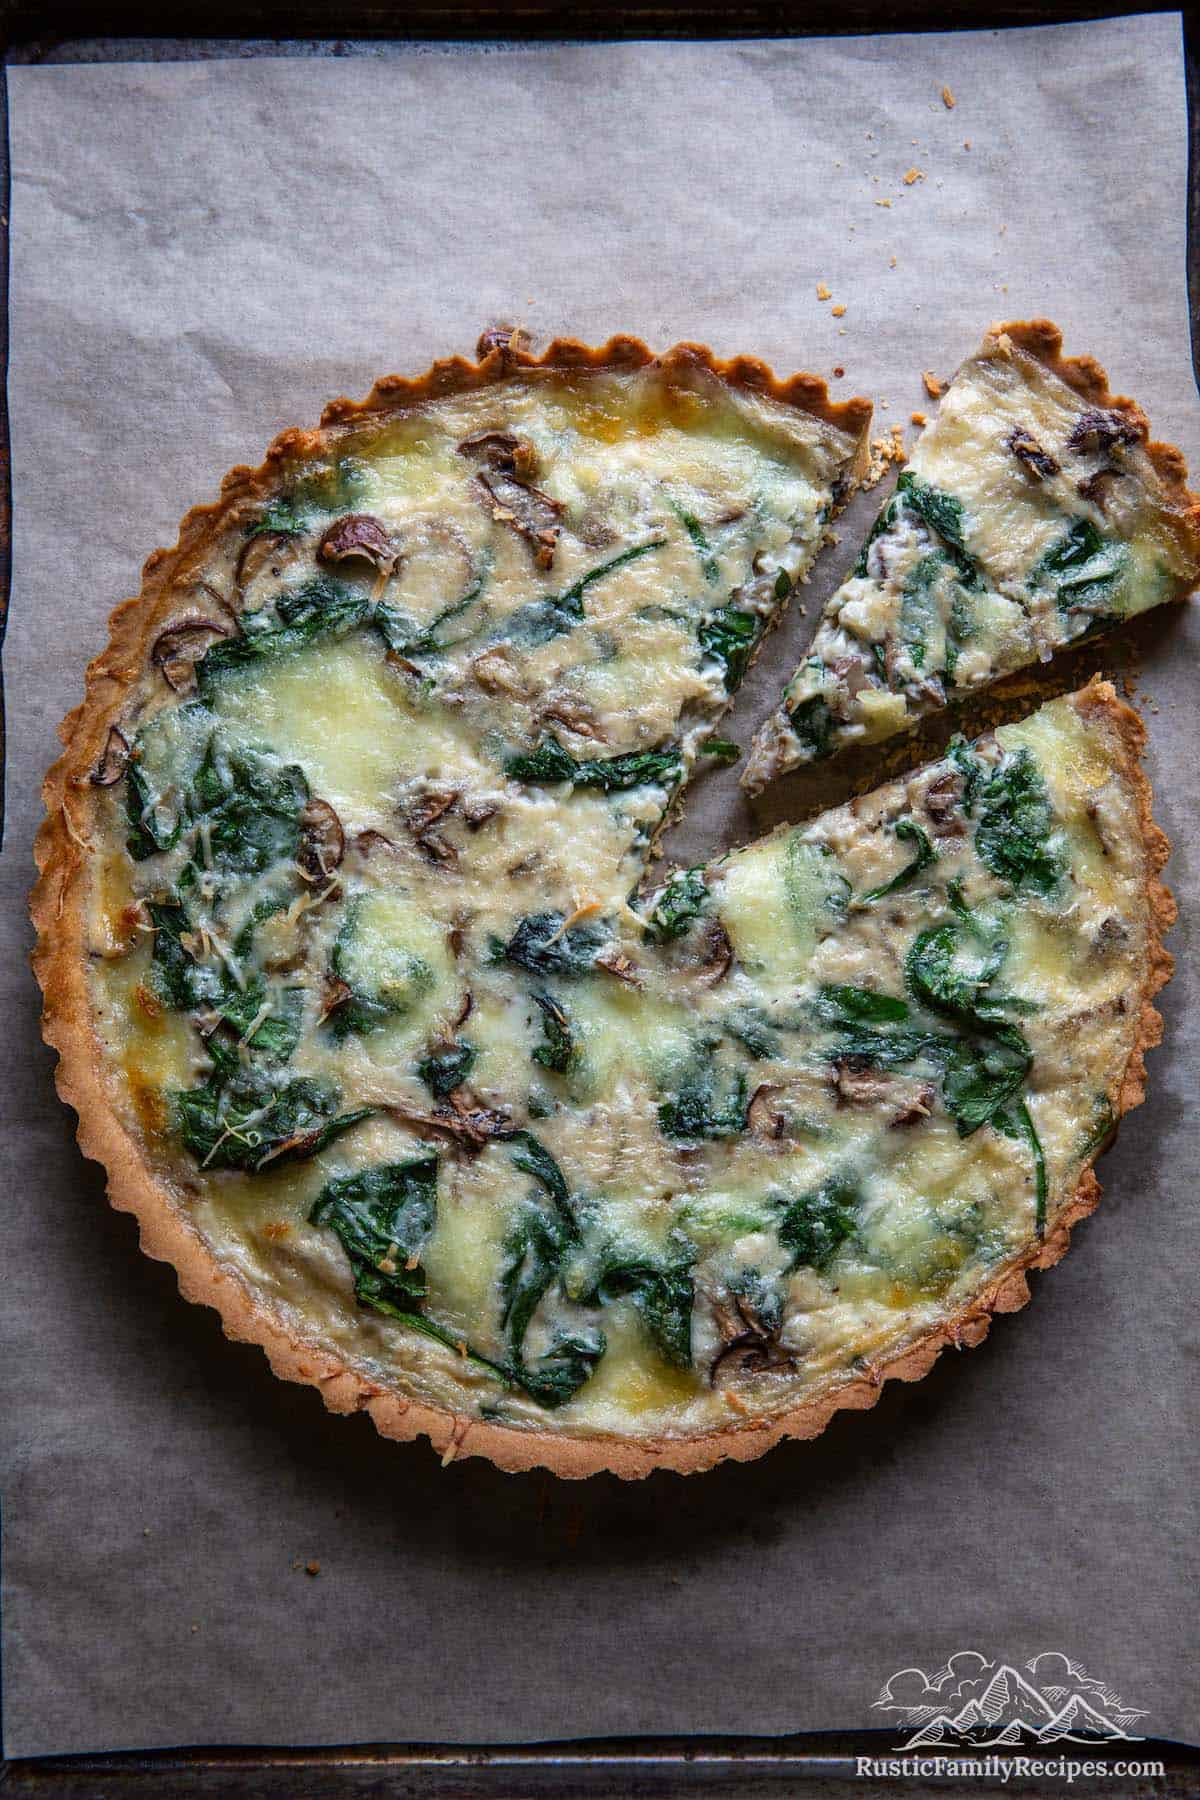 Spinach mushroom quiche on parchment paper with a slice taken out